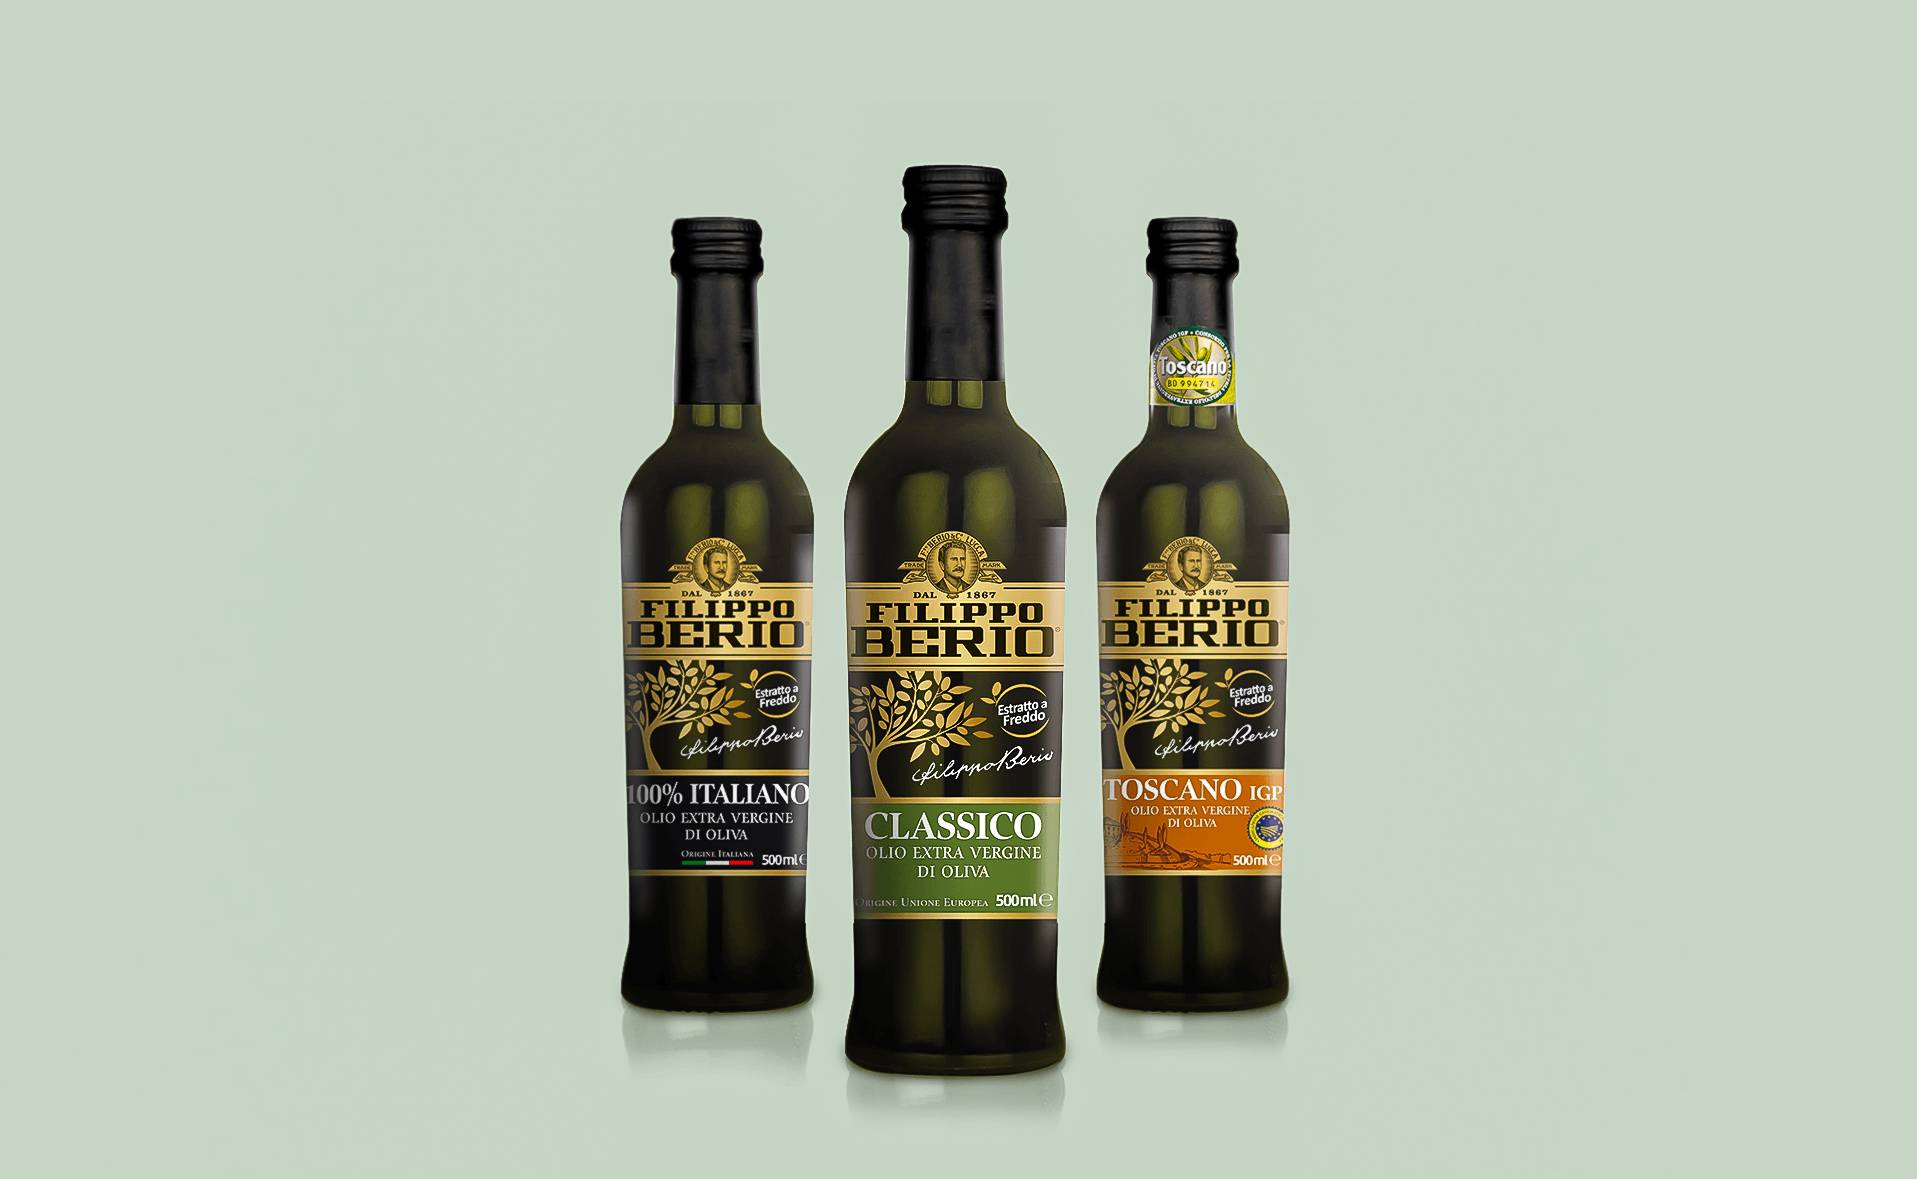 Filippo Berio Professional: an exclusive line of high-quality olive oils for the Catering and Food Service